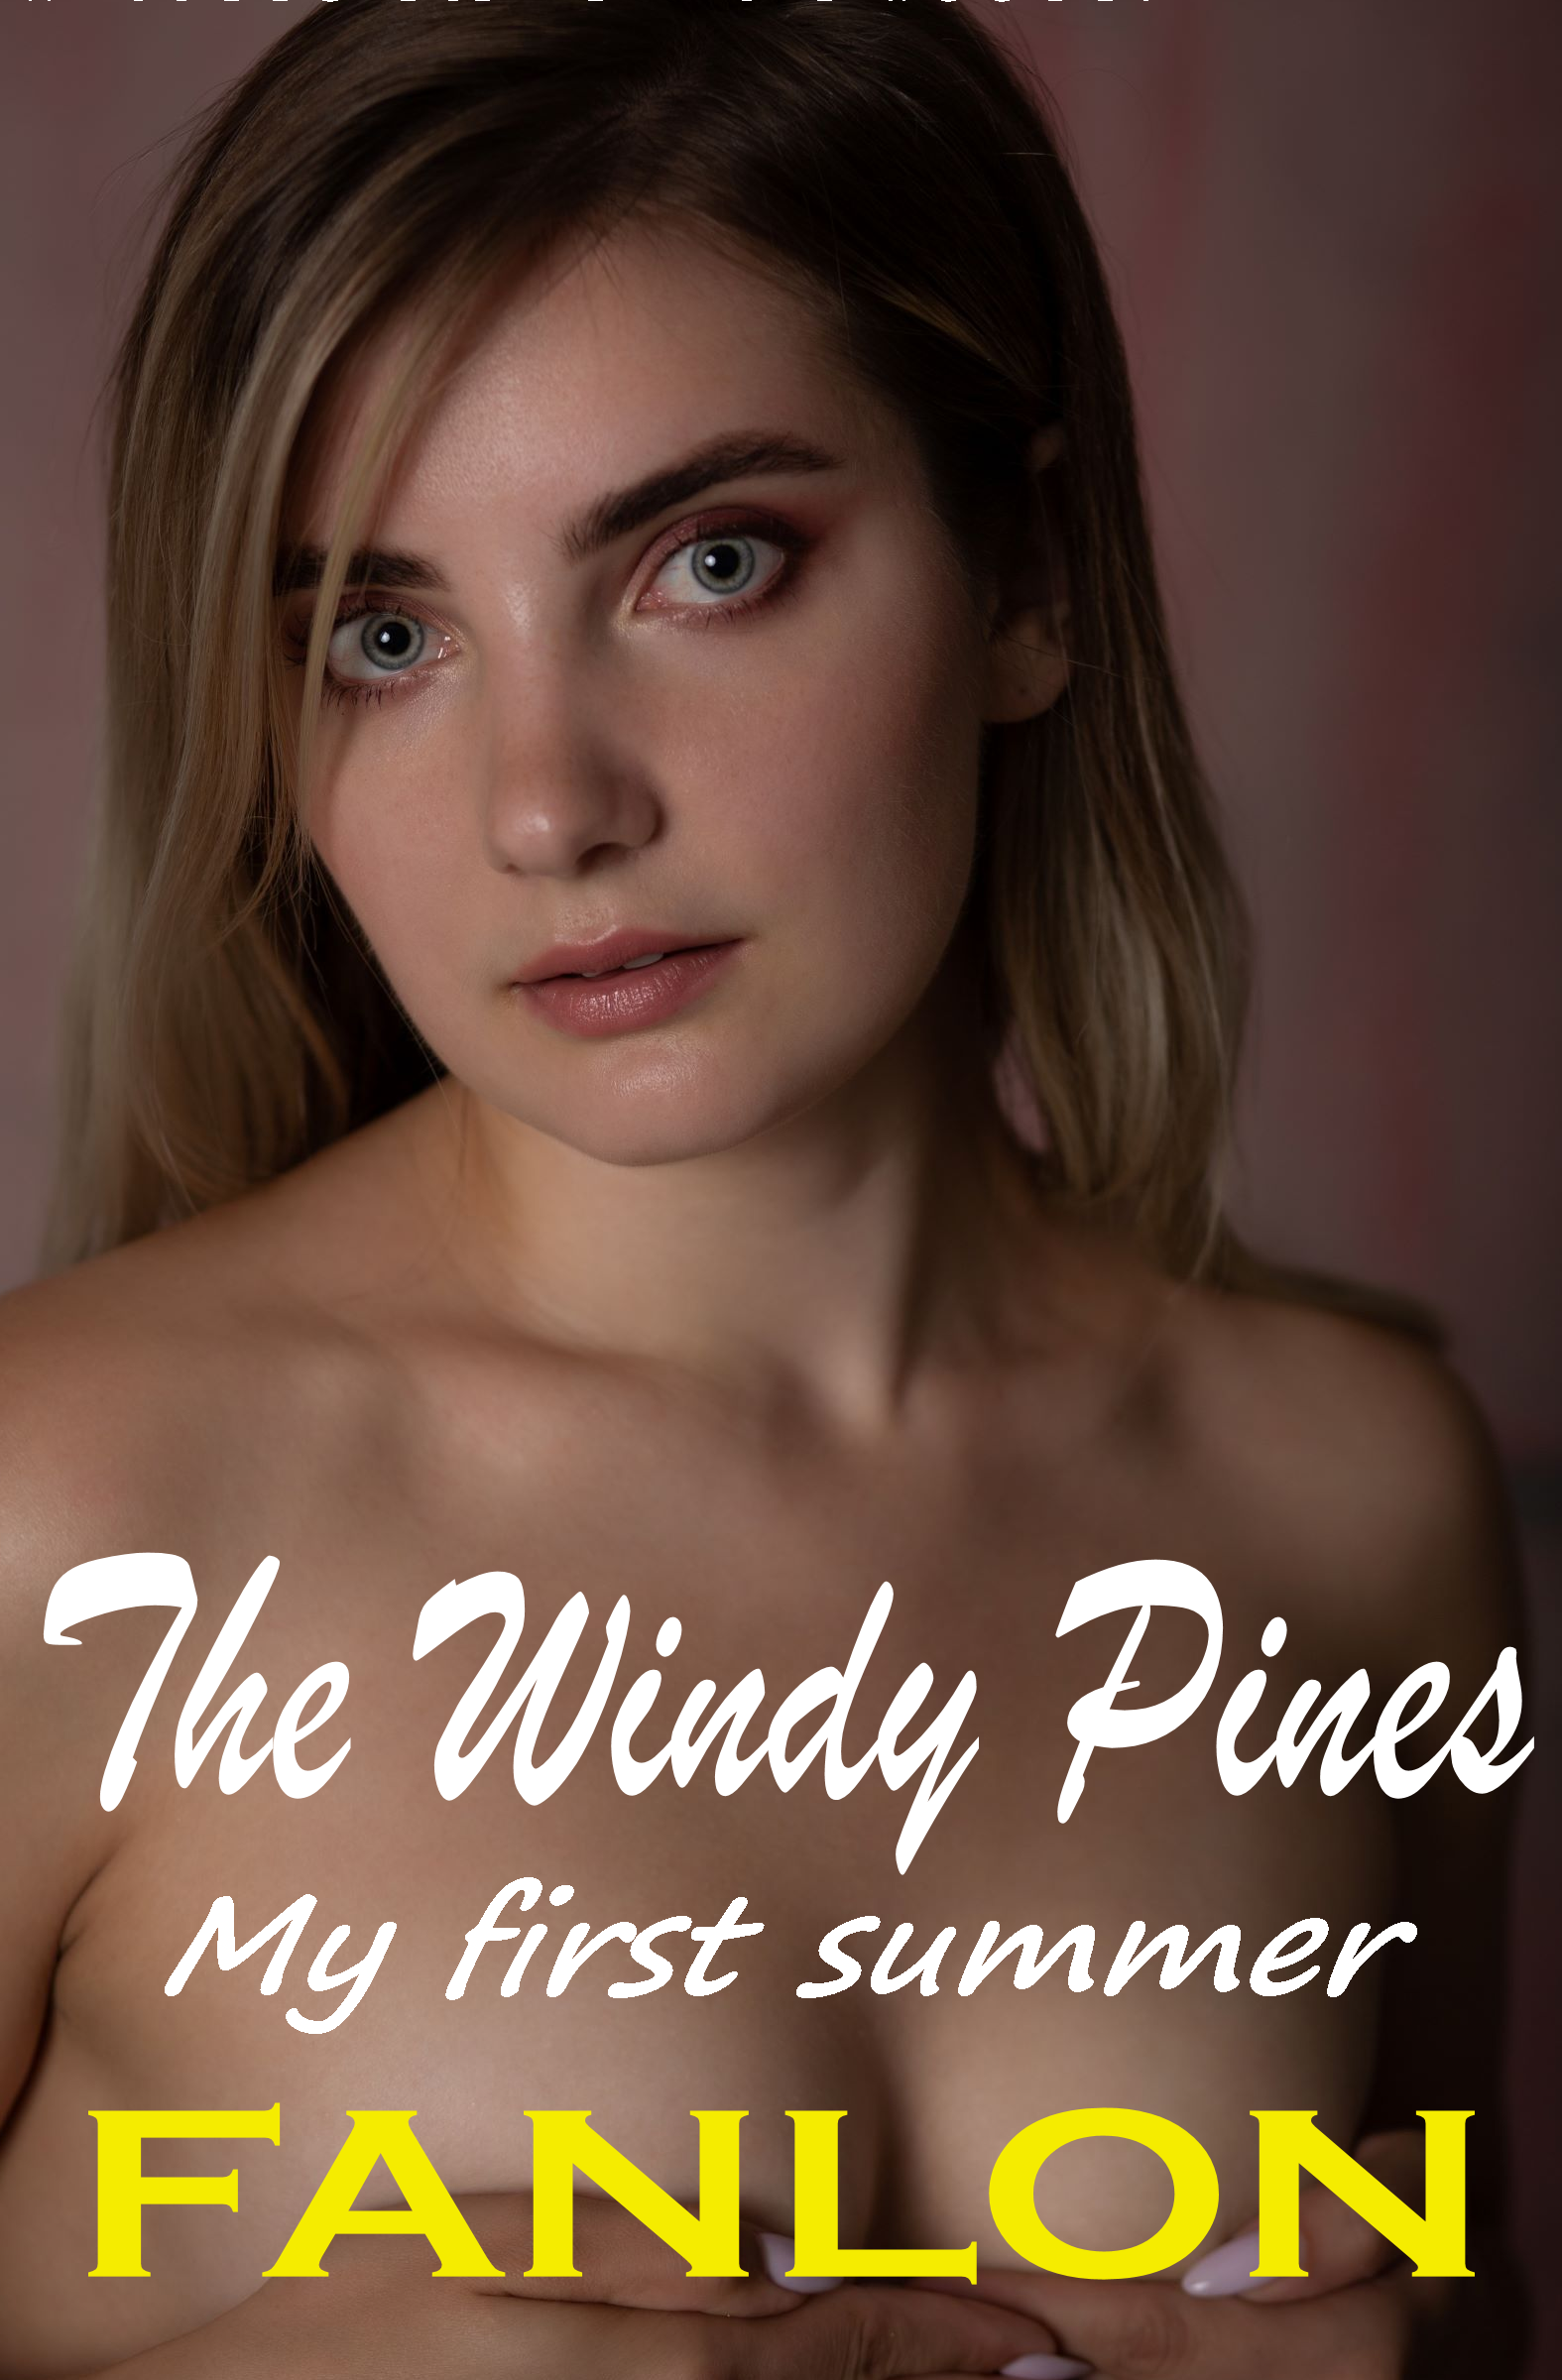 Preview) The Windy Pines, My First Summer by Fanlon